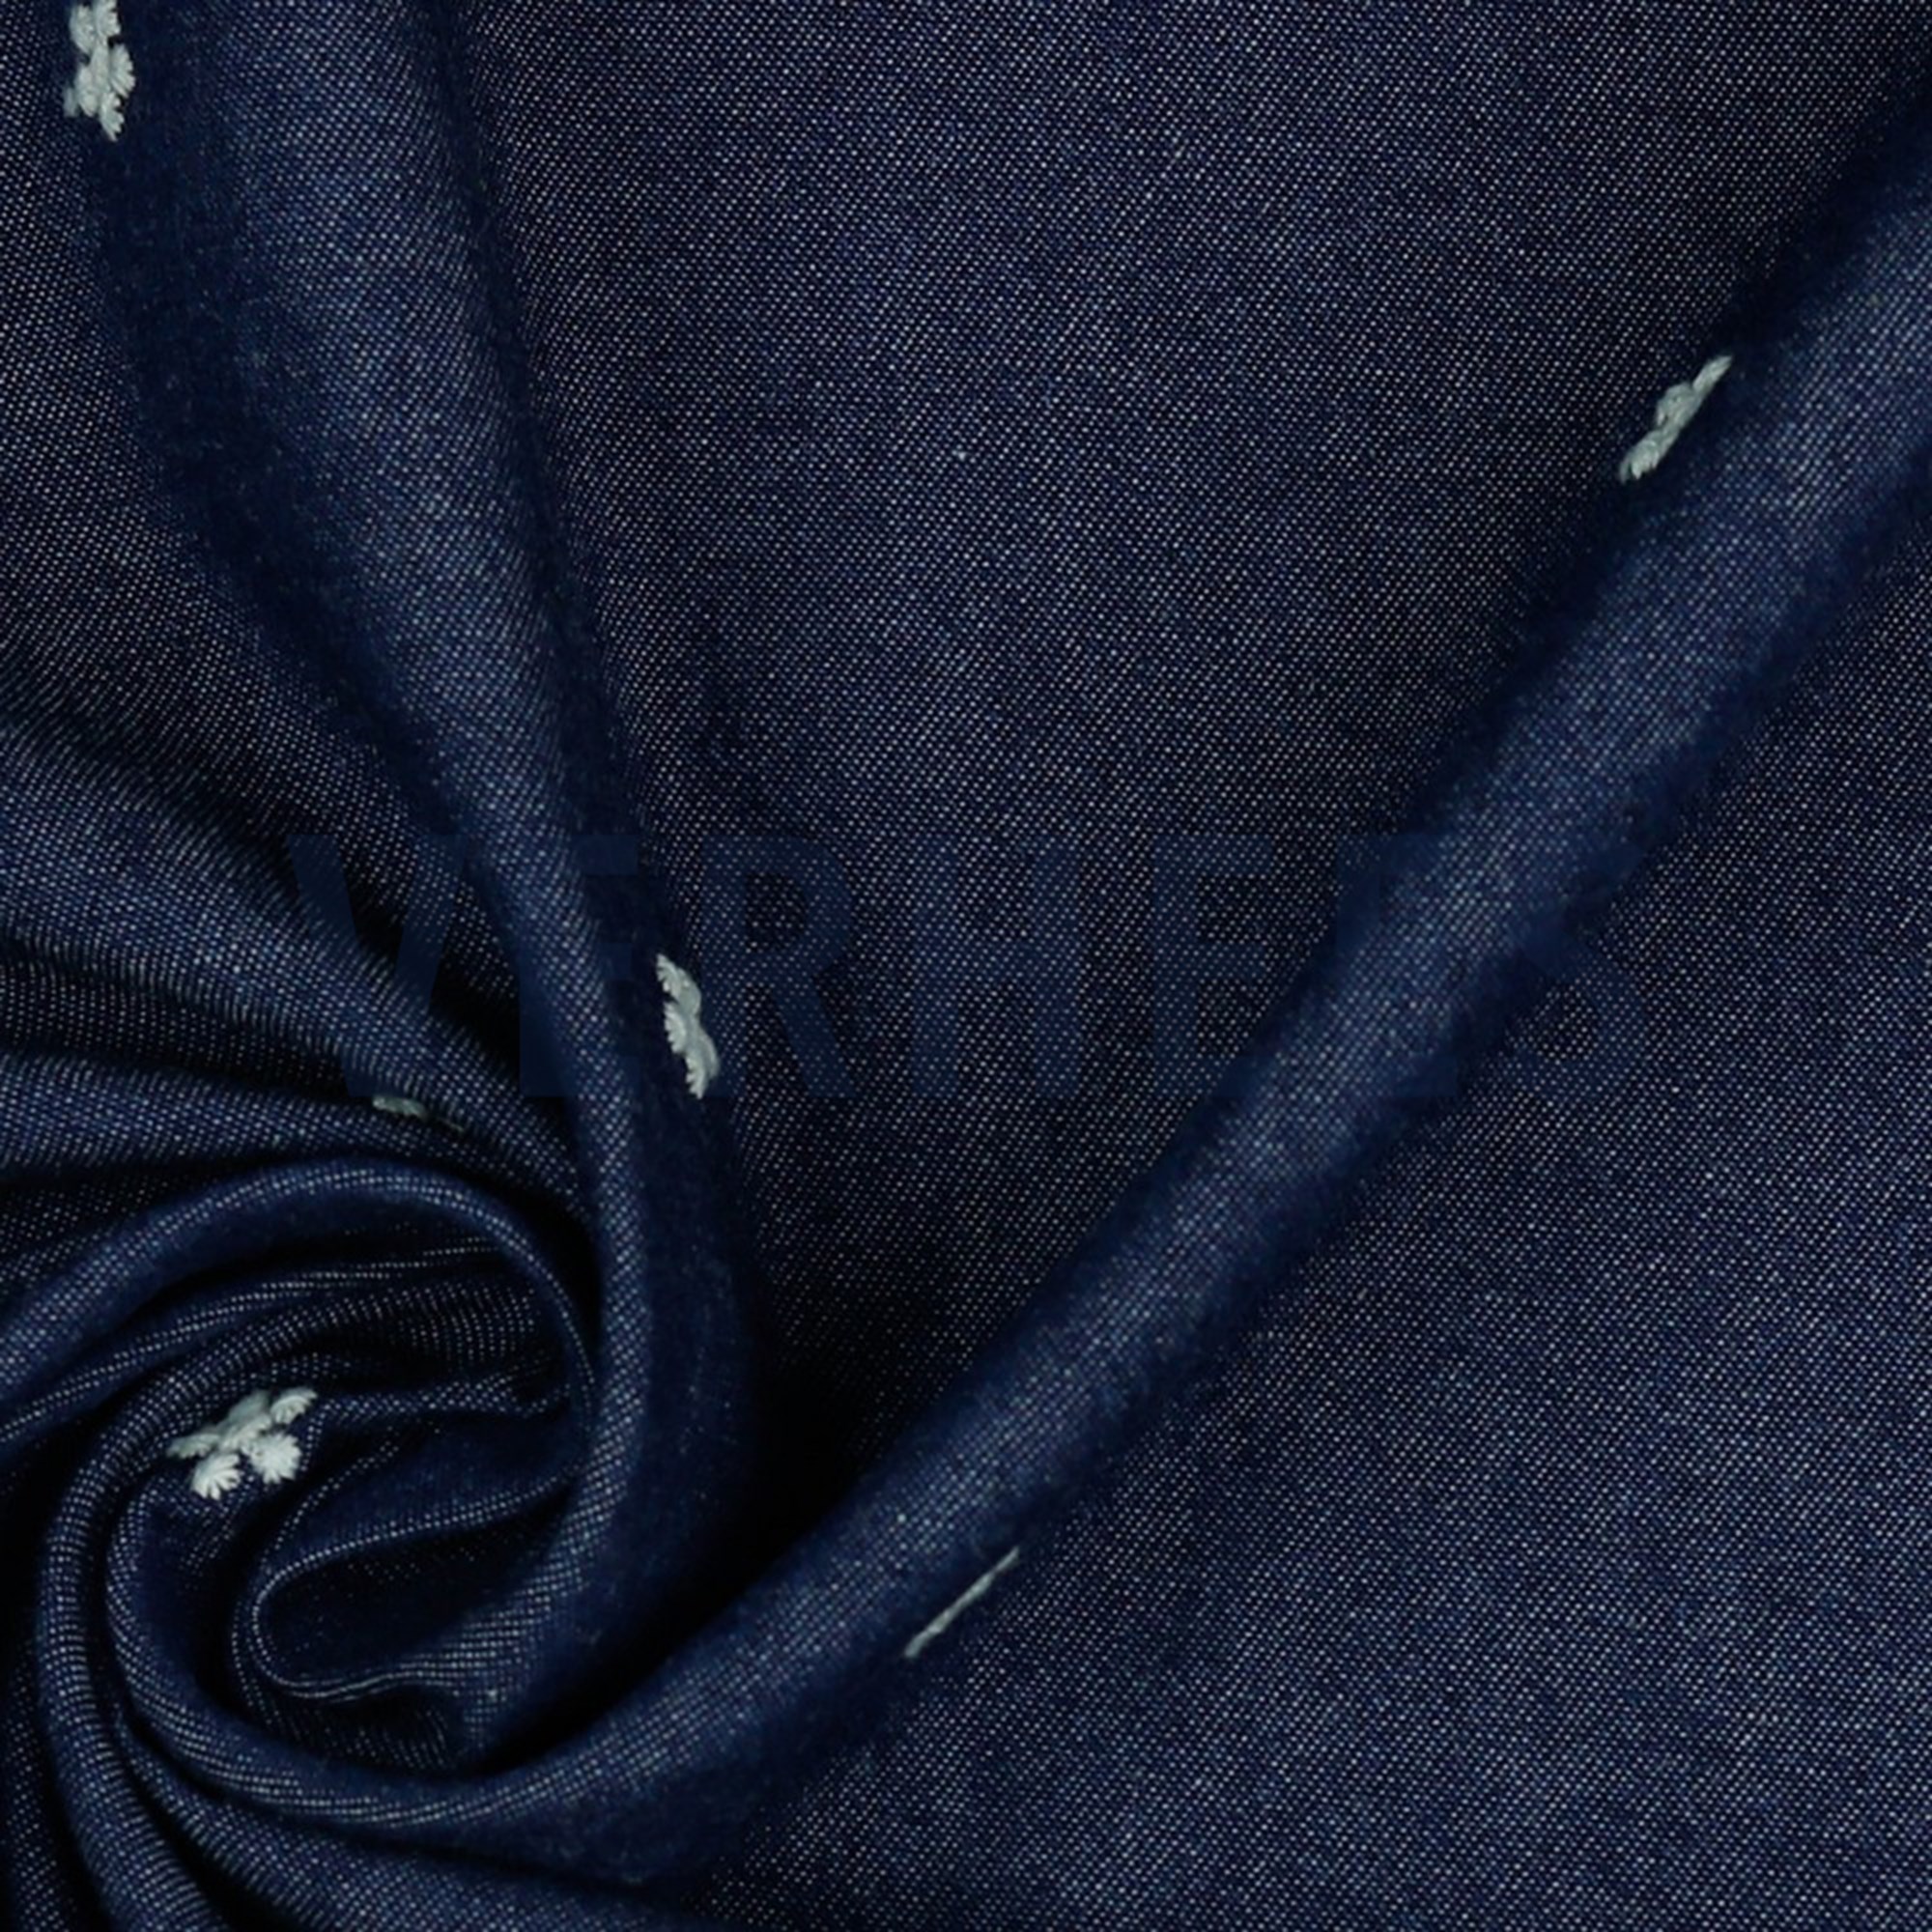 JEANS EMBROIDERY DARK BLUE (high resolution) #3